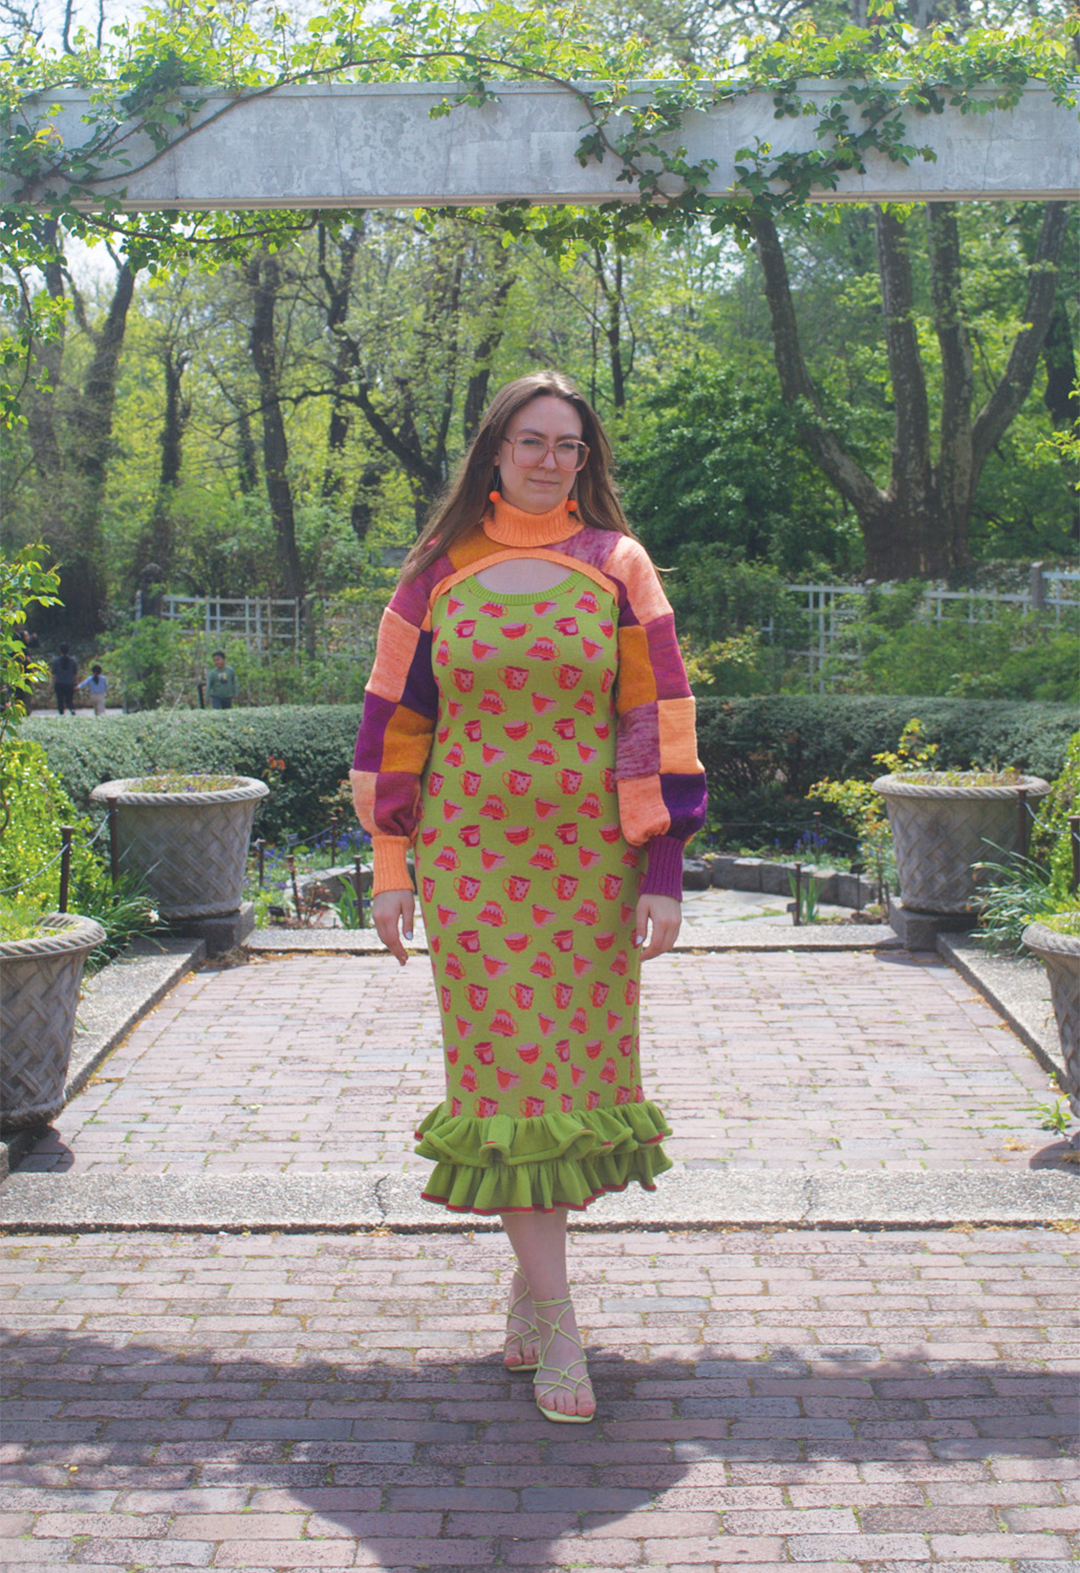 Photo of a model wearing a green, teacup-motif dress with a ruffle hem and a purple-and-orange patchwork turtleneck shrug and standing under an archway.